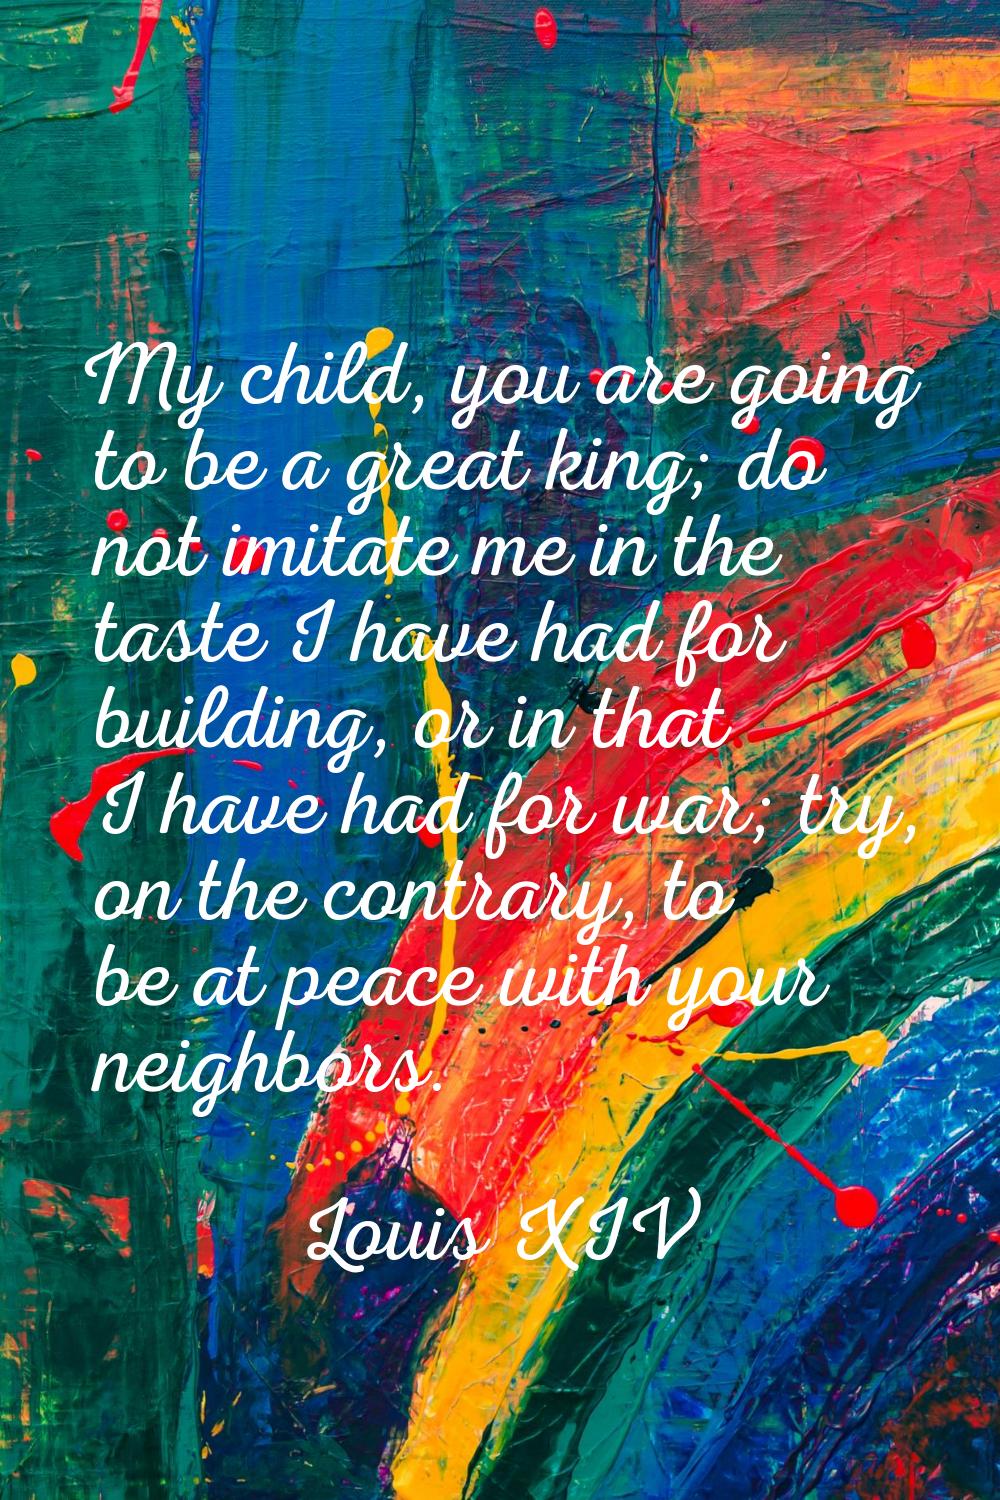 My child, you are going to be a great king; do not imitate me in the taste I have had for building,